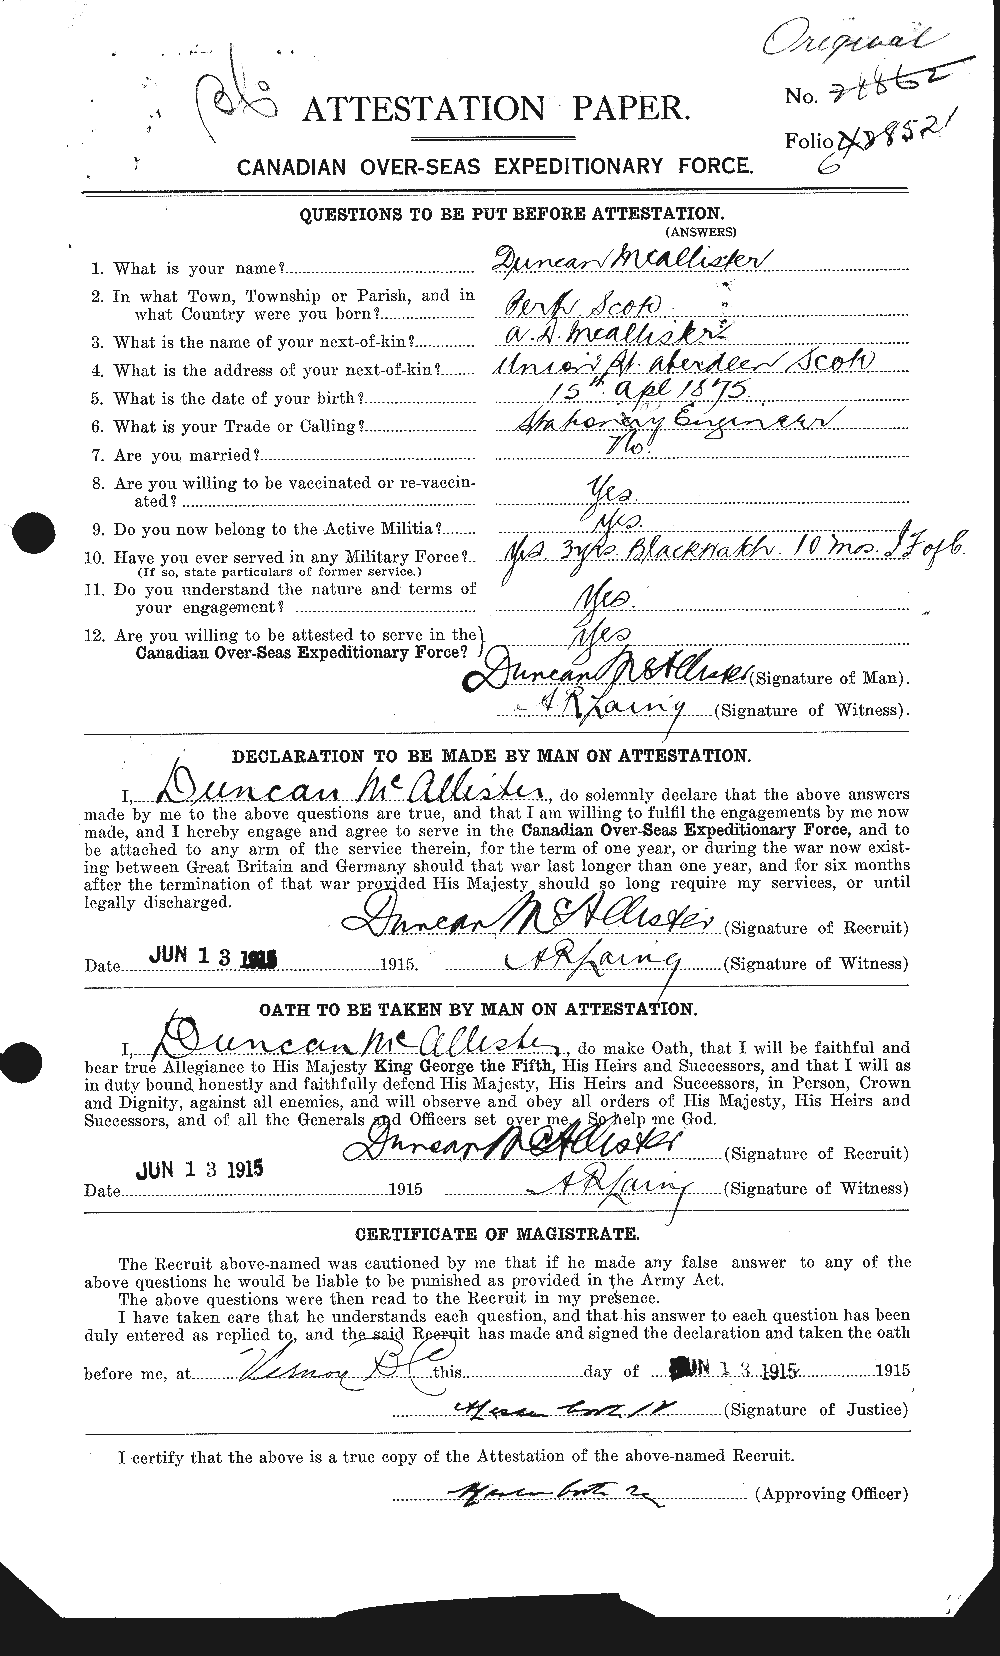 Personnel Records of the First World War - CEF 513178a